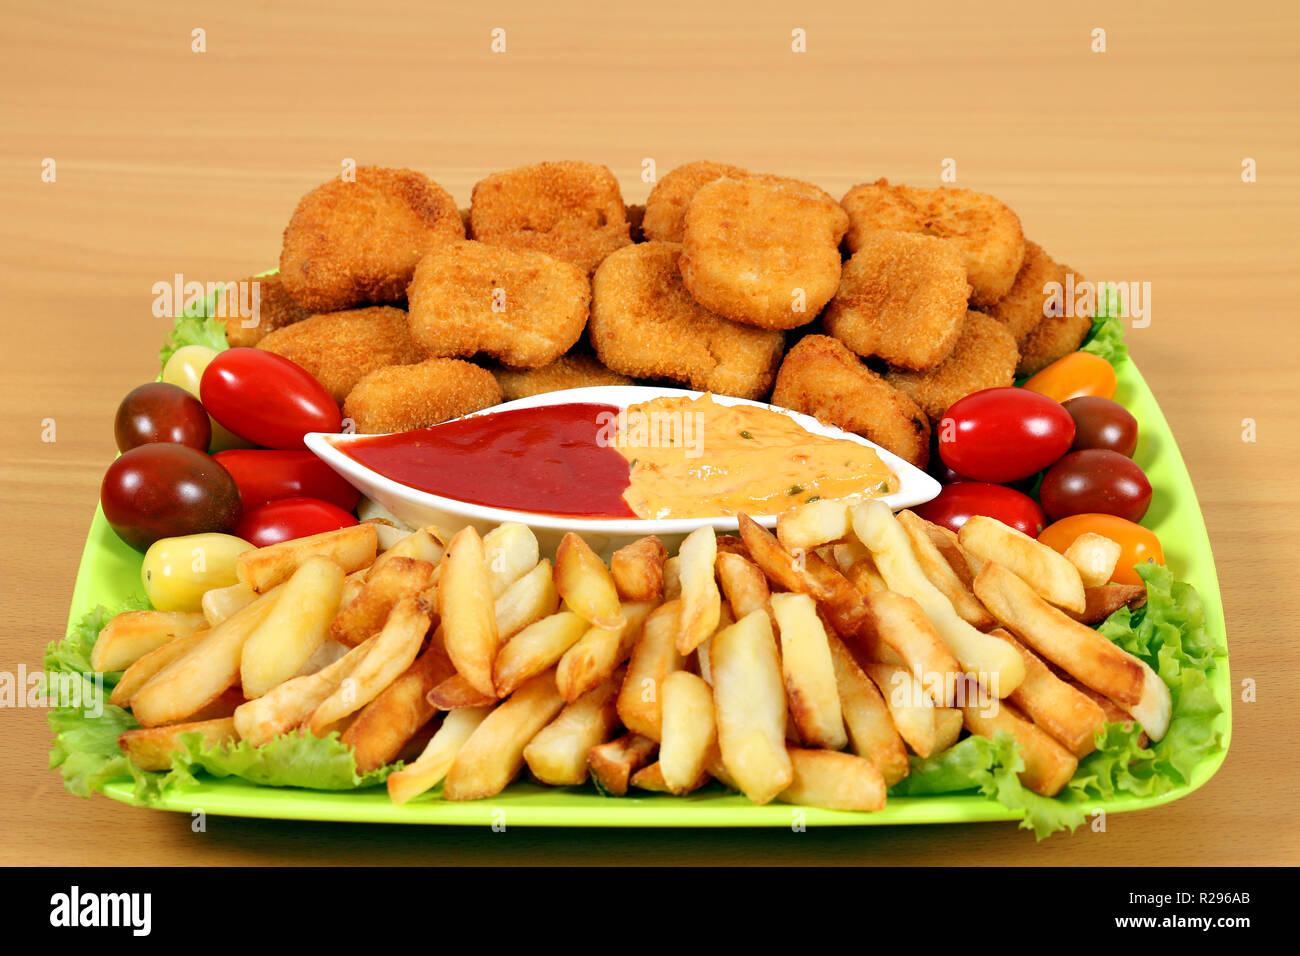 chicken nuggets and french fries on plate fast food Stock Photo